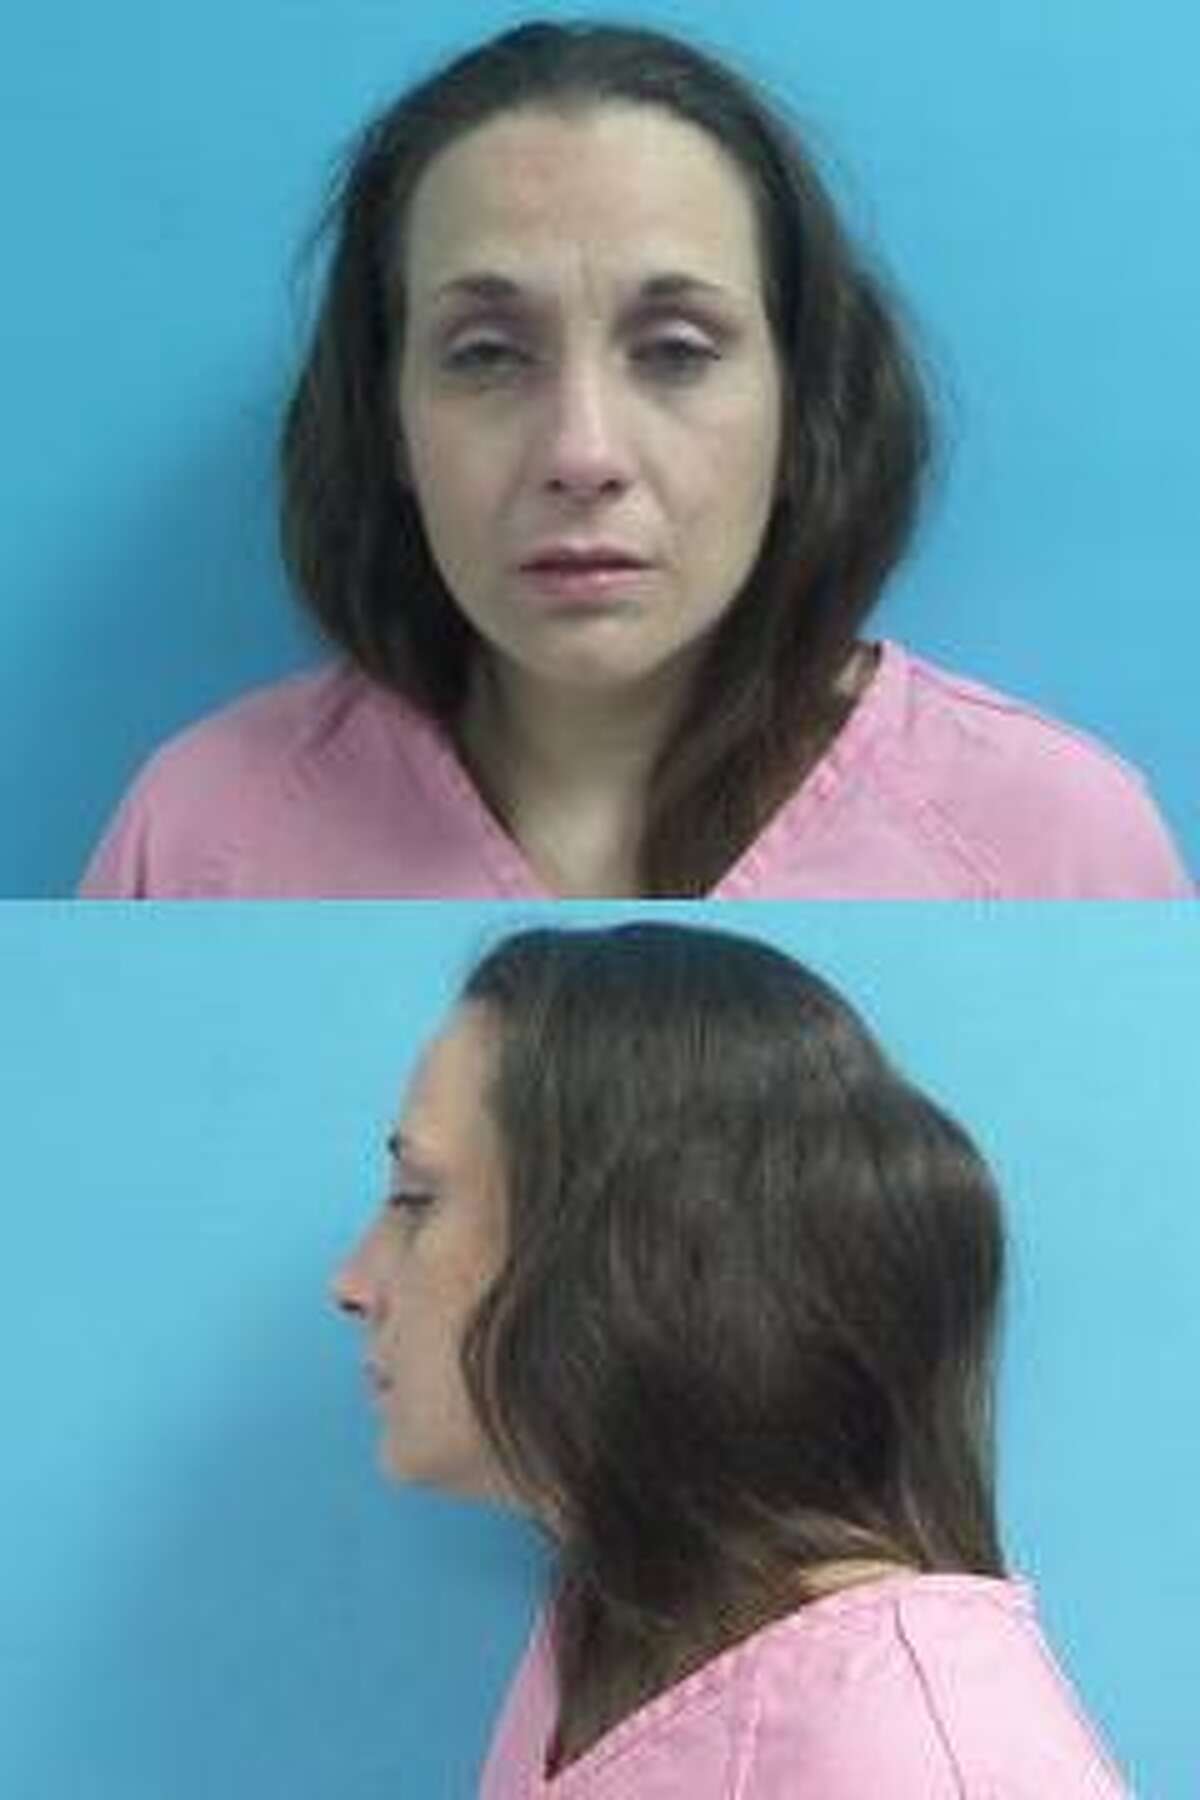 April Diane Petruska, 34, has been charged with evading arrest or detention, intent to give false information and failure to identify herself as a fugitive, according to Aransas County jail records. Her bond has not been set as of Tuesday afternoon.